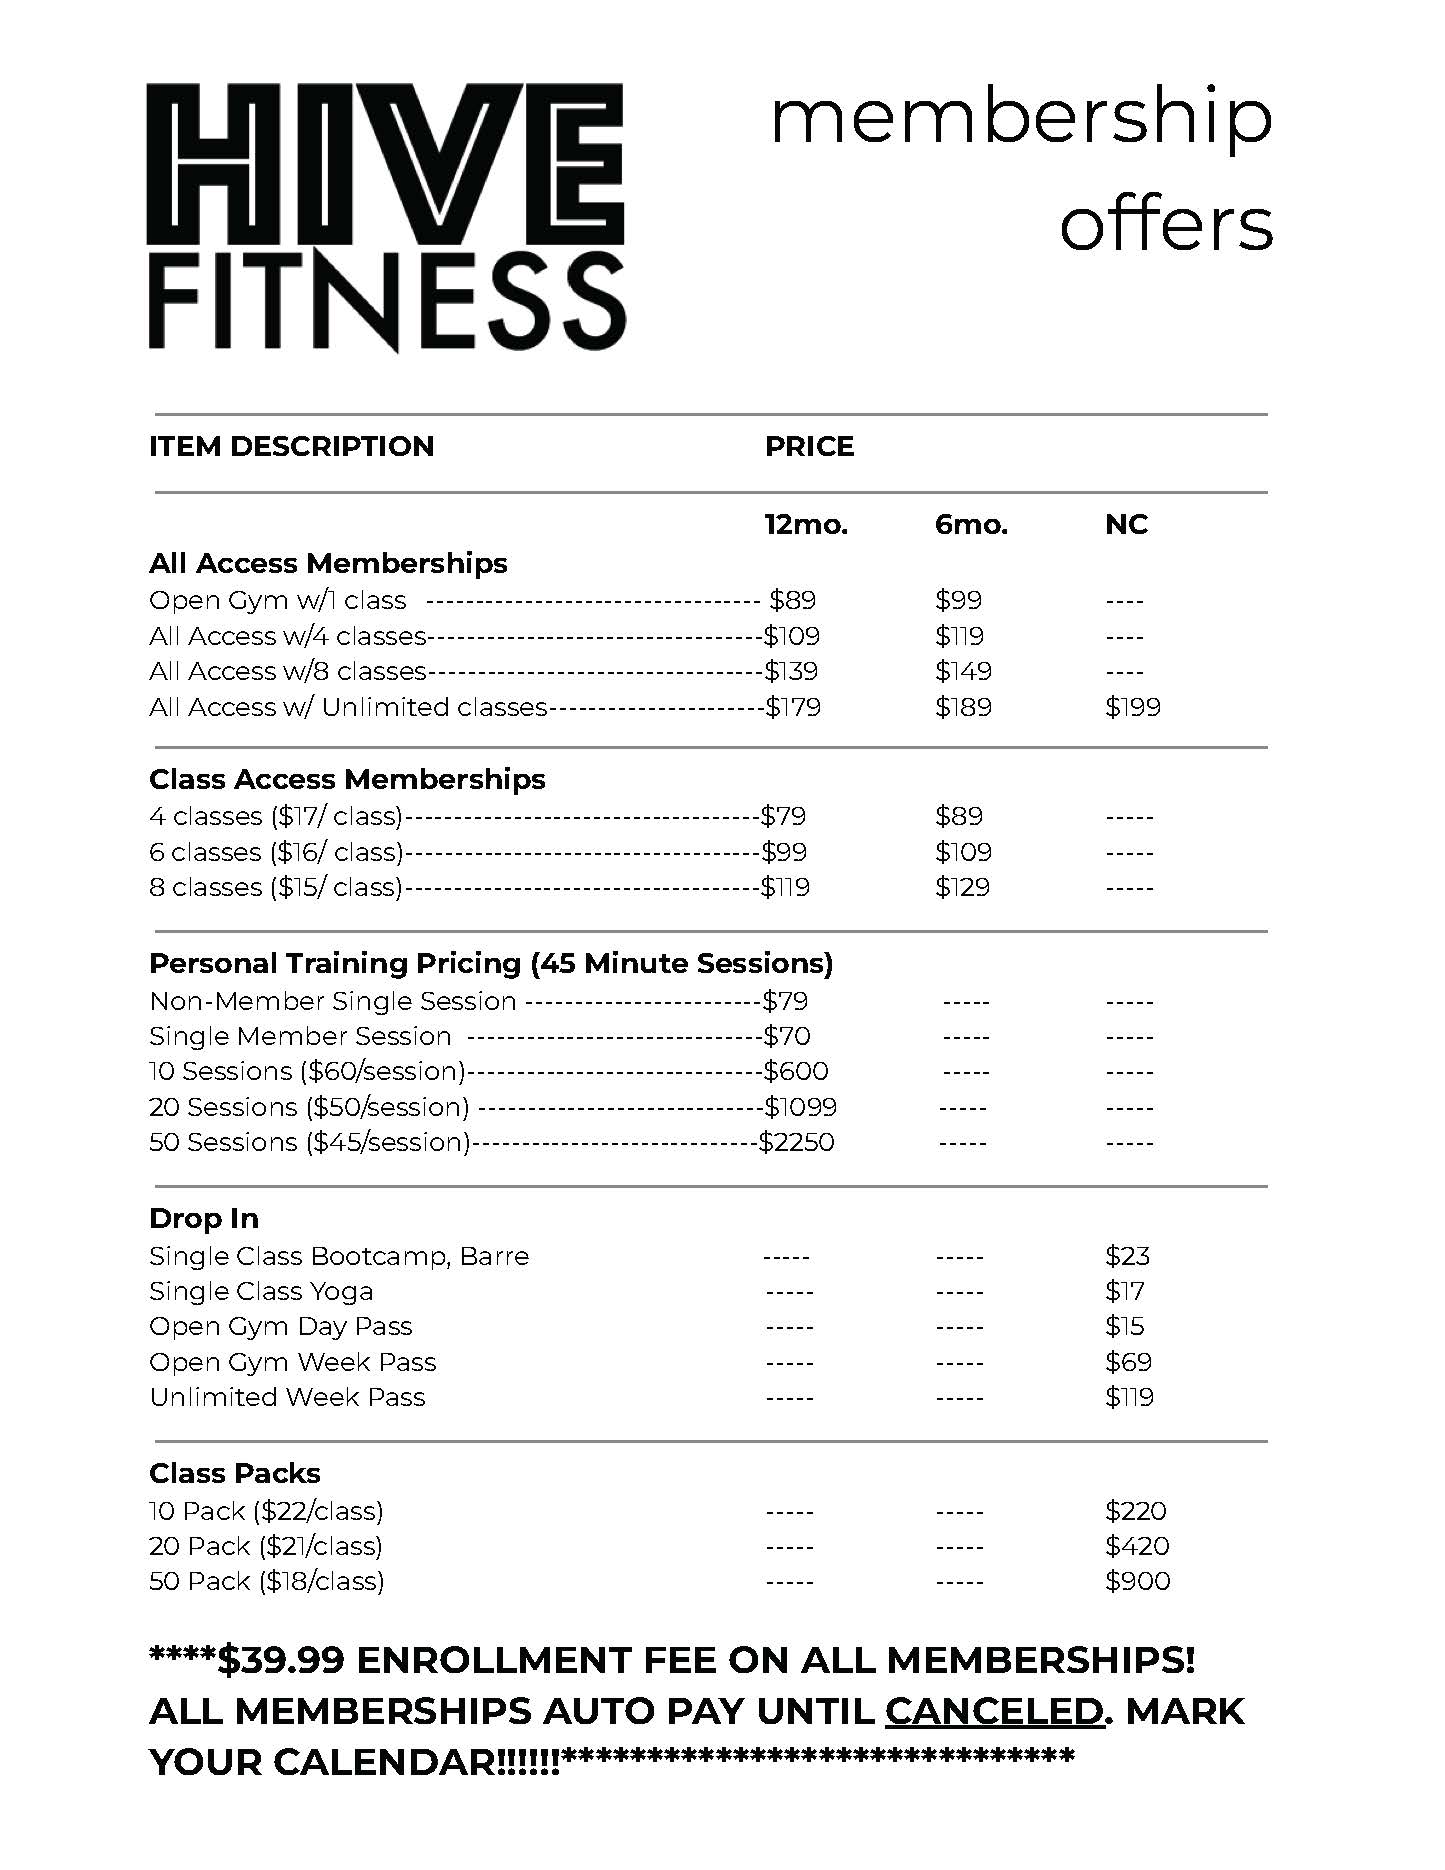 HIVE FITNESS membership offers-18